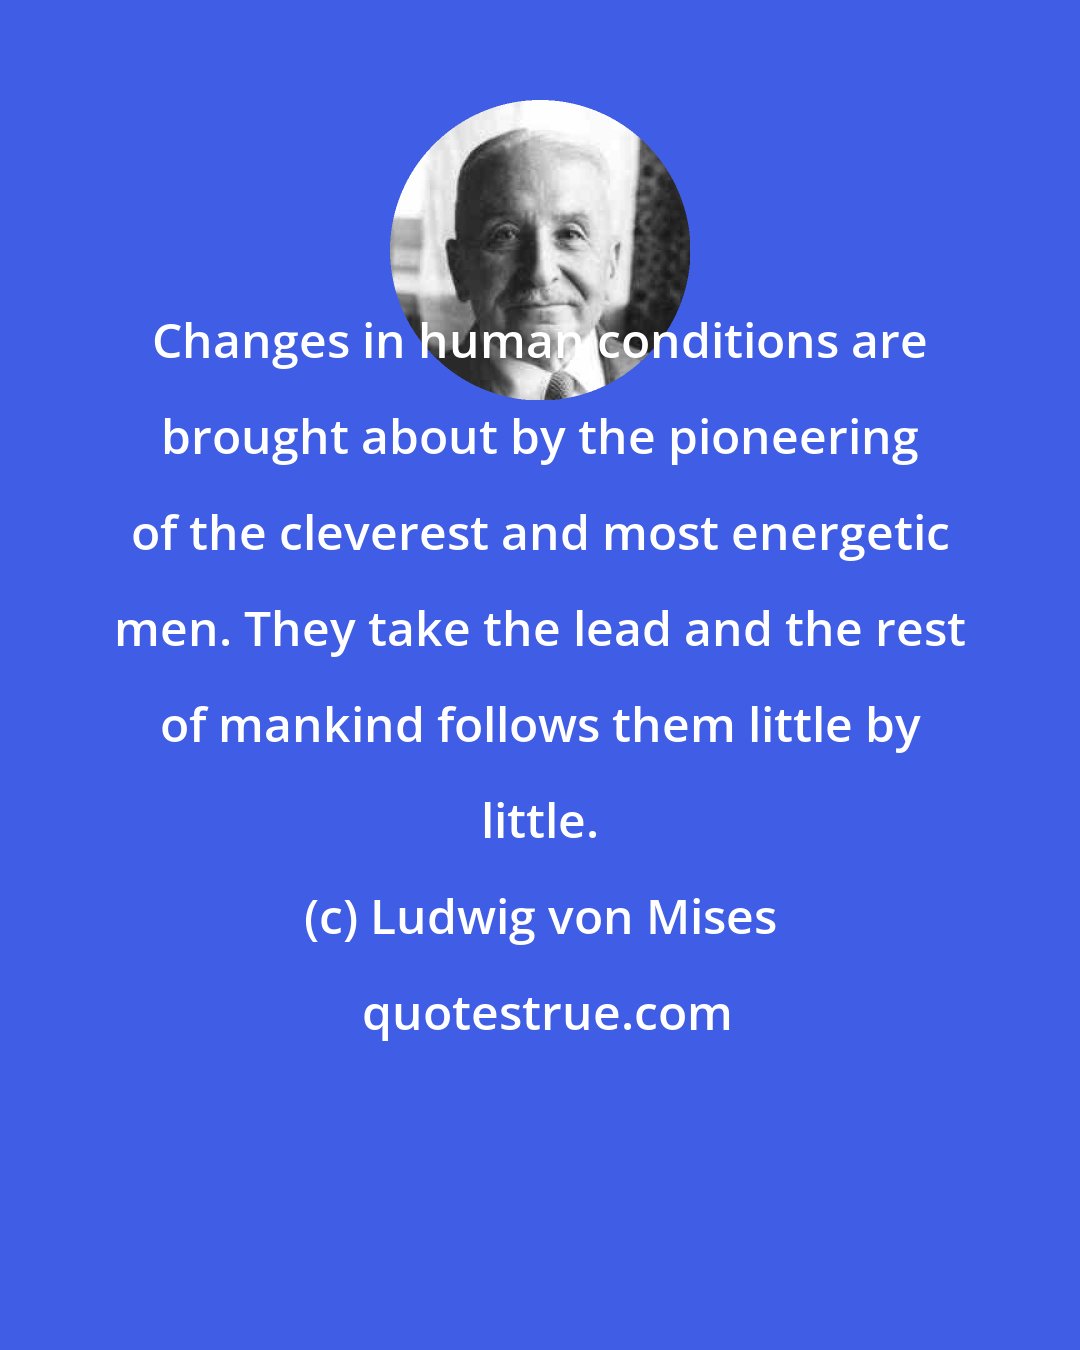 Ludwig von Mises: Changes in human conditions are brought about by the pioneering of the cleverest and most energetic men. They take the lead and the rest of mankind follows them little by little.